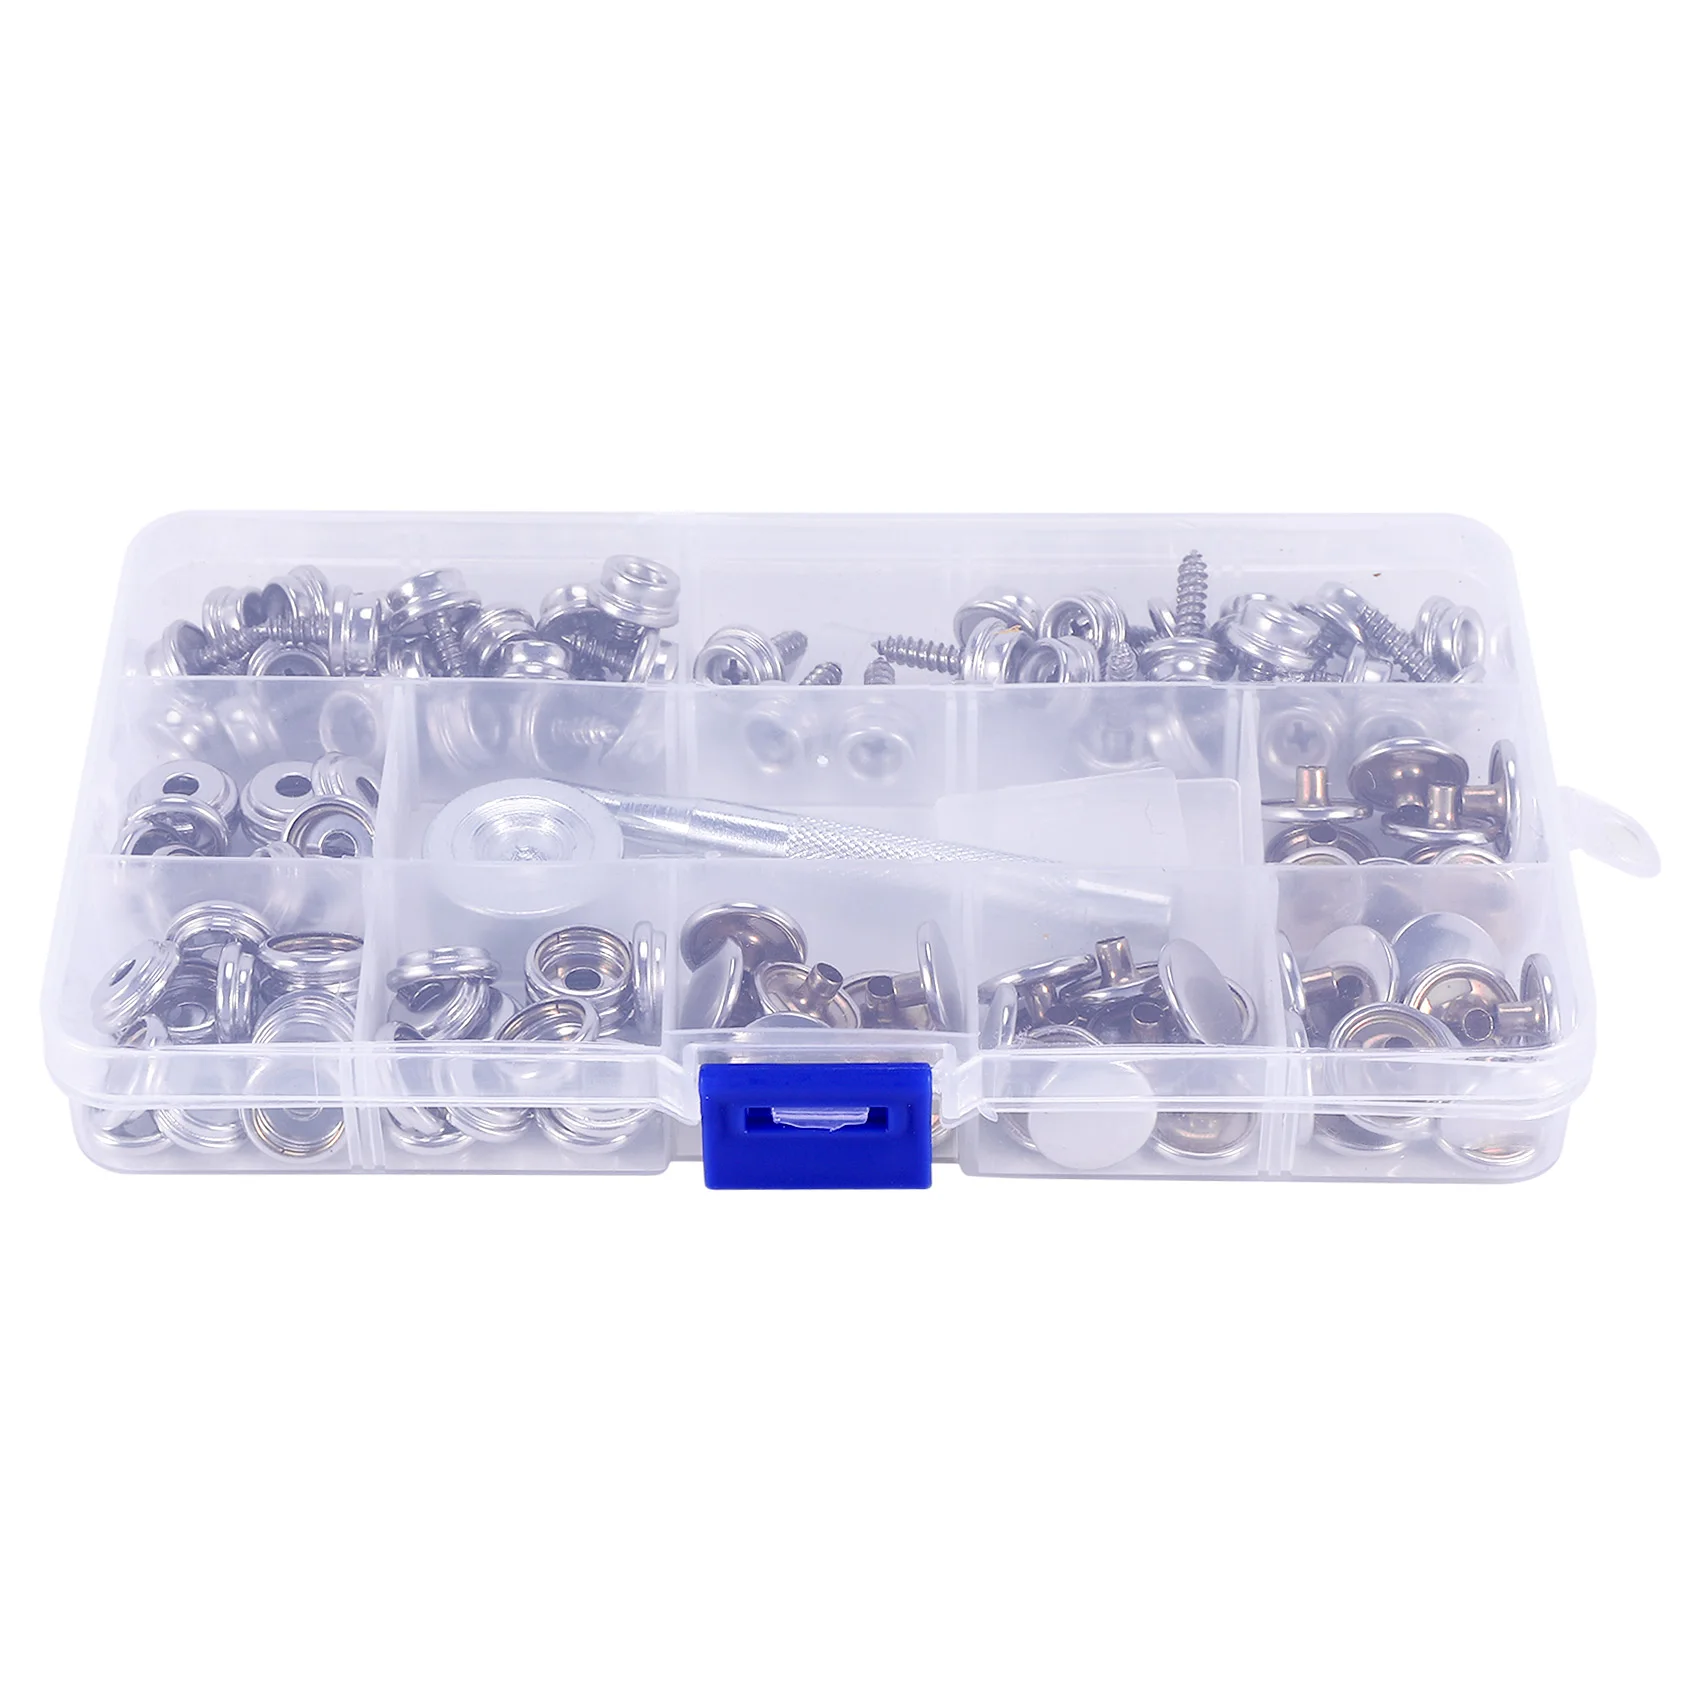 

120-Pieces Stainless Steel Marine Grade Canvas and Upholstery Boat Cover Snap Button Fastener Kit